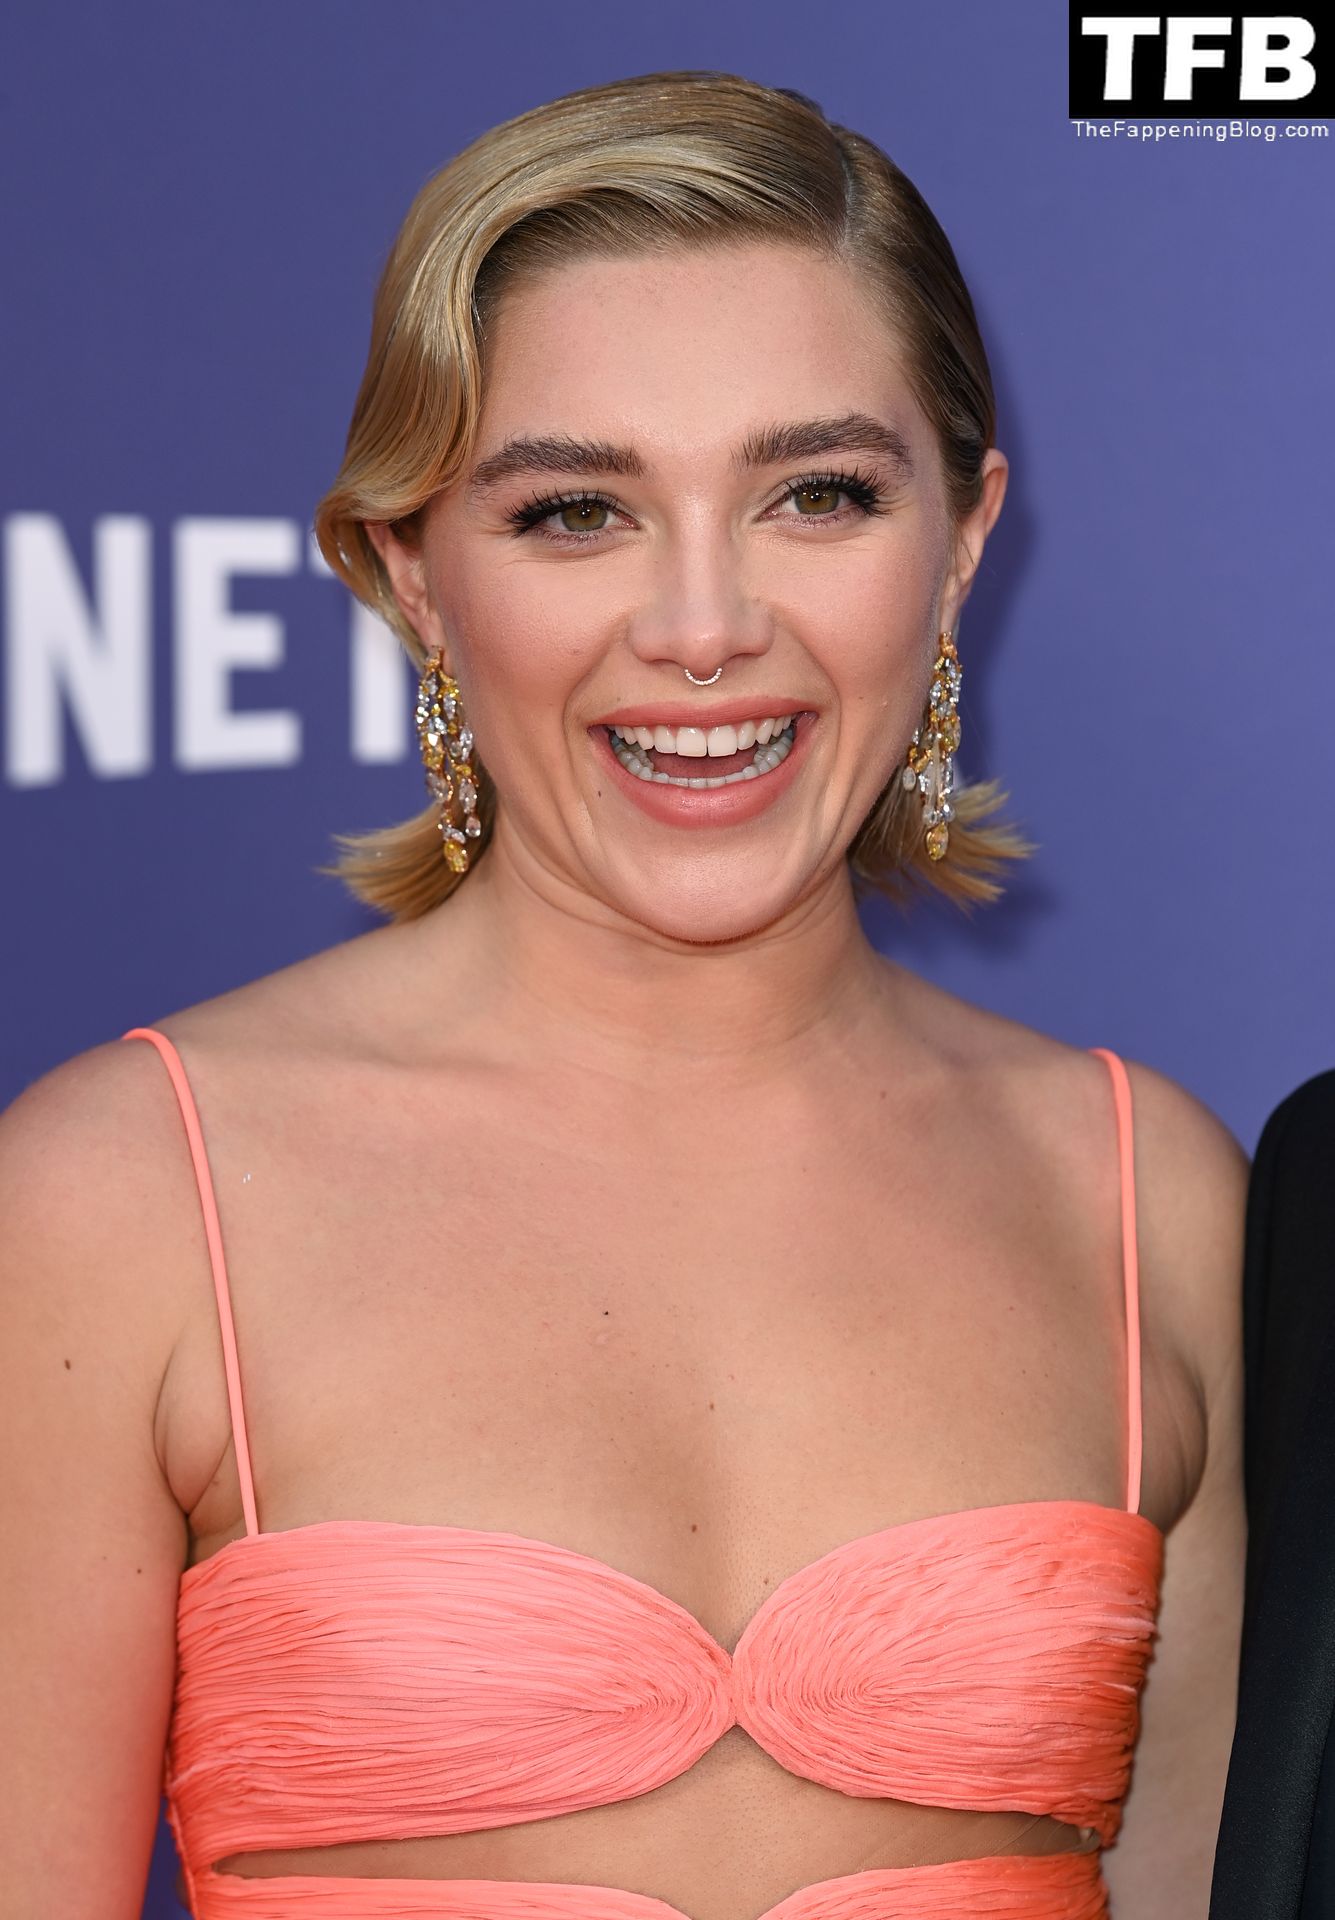 Florence-Pugh-Sexy-The-Fappening-Blog-63-1.jpg